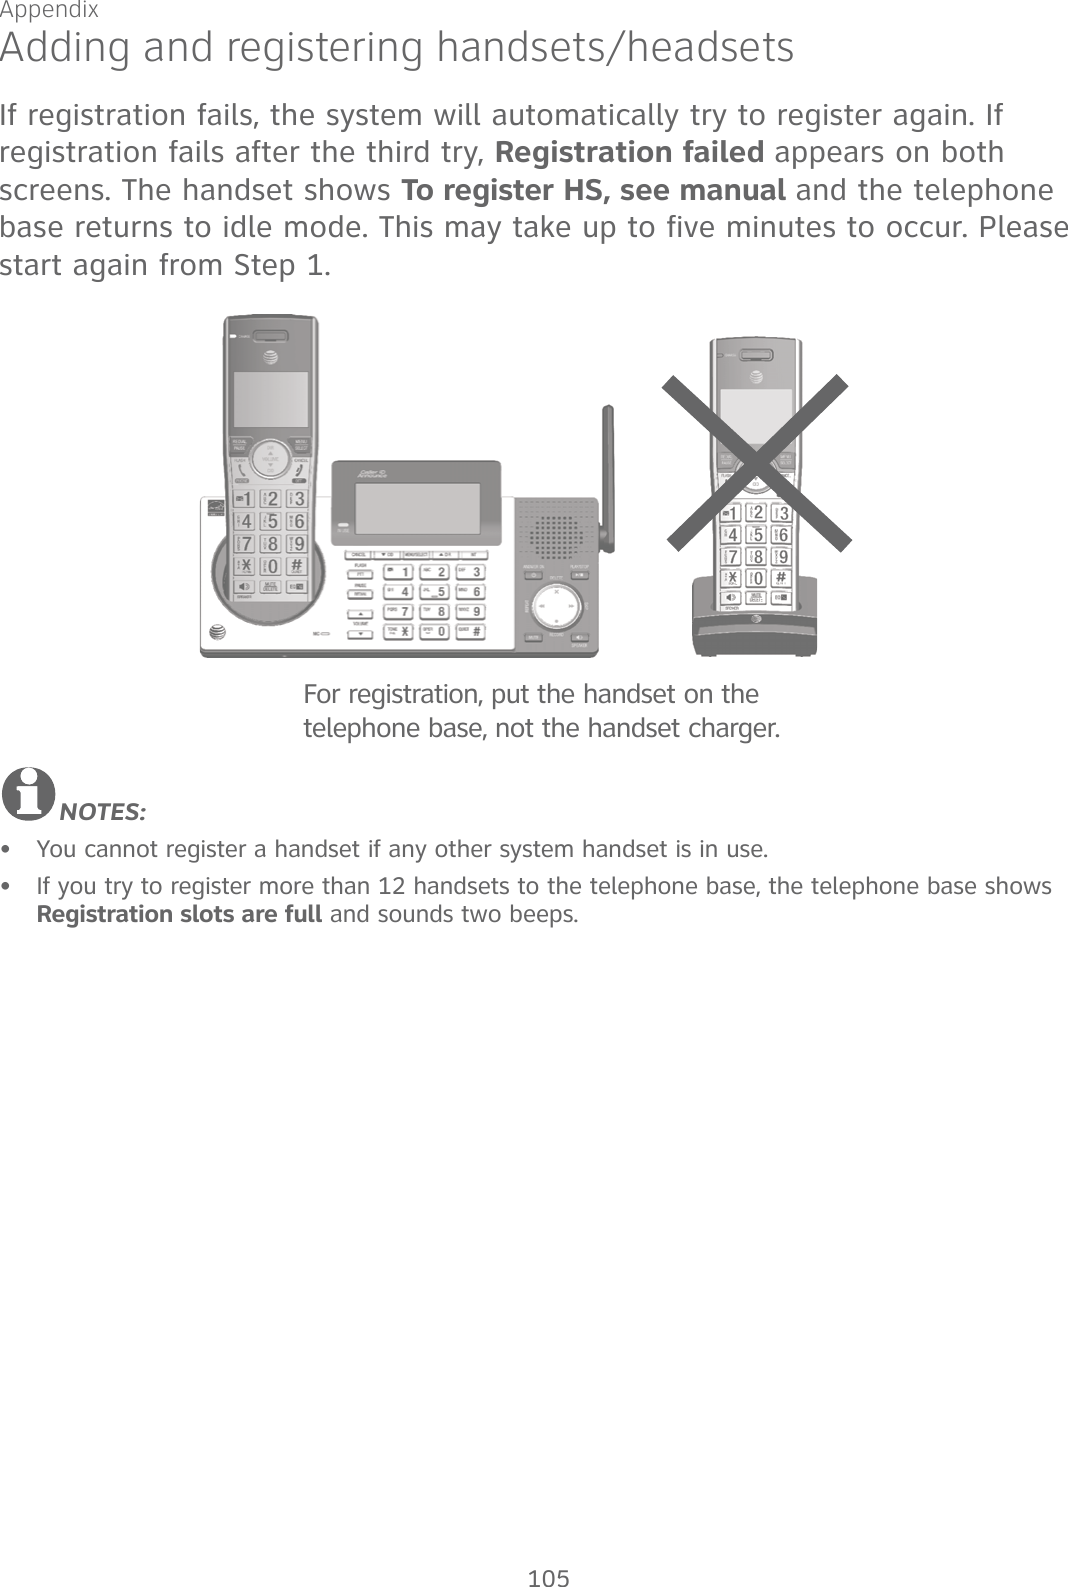 Appendix 105Adding and registering handsets/headsetsIf registration fails, the system will automatically try to register again. If registration fails after the third try, Registration failed appears on both screens. The handset shows To register HS, see manual and the telephone base returns to idle mode. This may take up to five minutes to occur. Please start again from Step 1.NOTES: You cannot register a handset if any other system handset is in use.If you try to register more than 12 handsets to the telephone base, the telephone base shows Registration slots are full and sounds two beeps.••For registration, put the handset on the telephone base, not the handset charger.